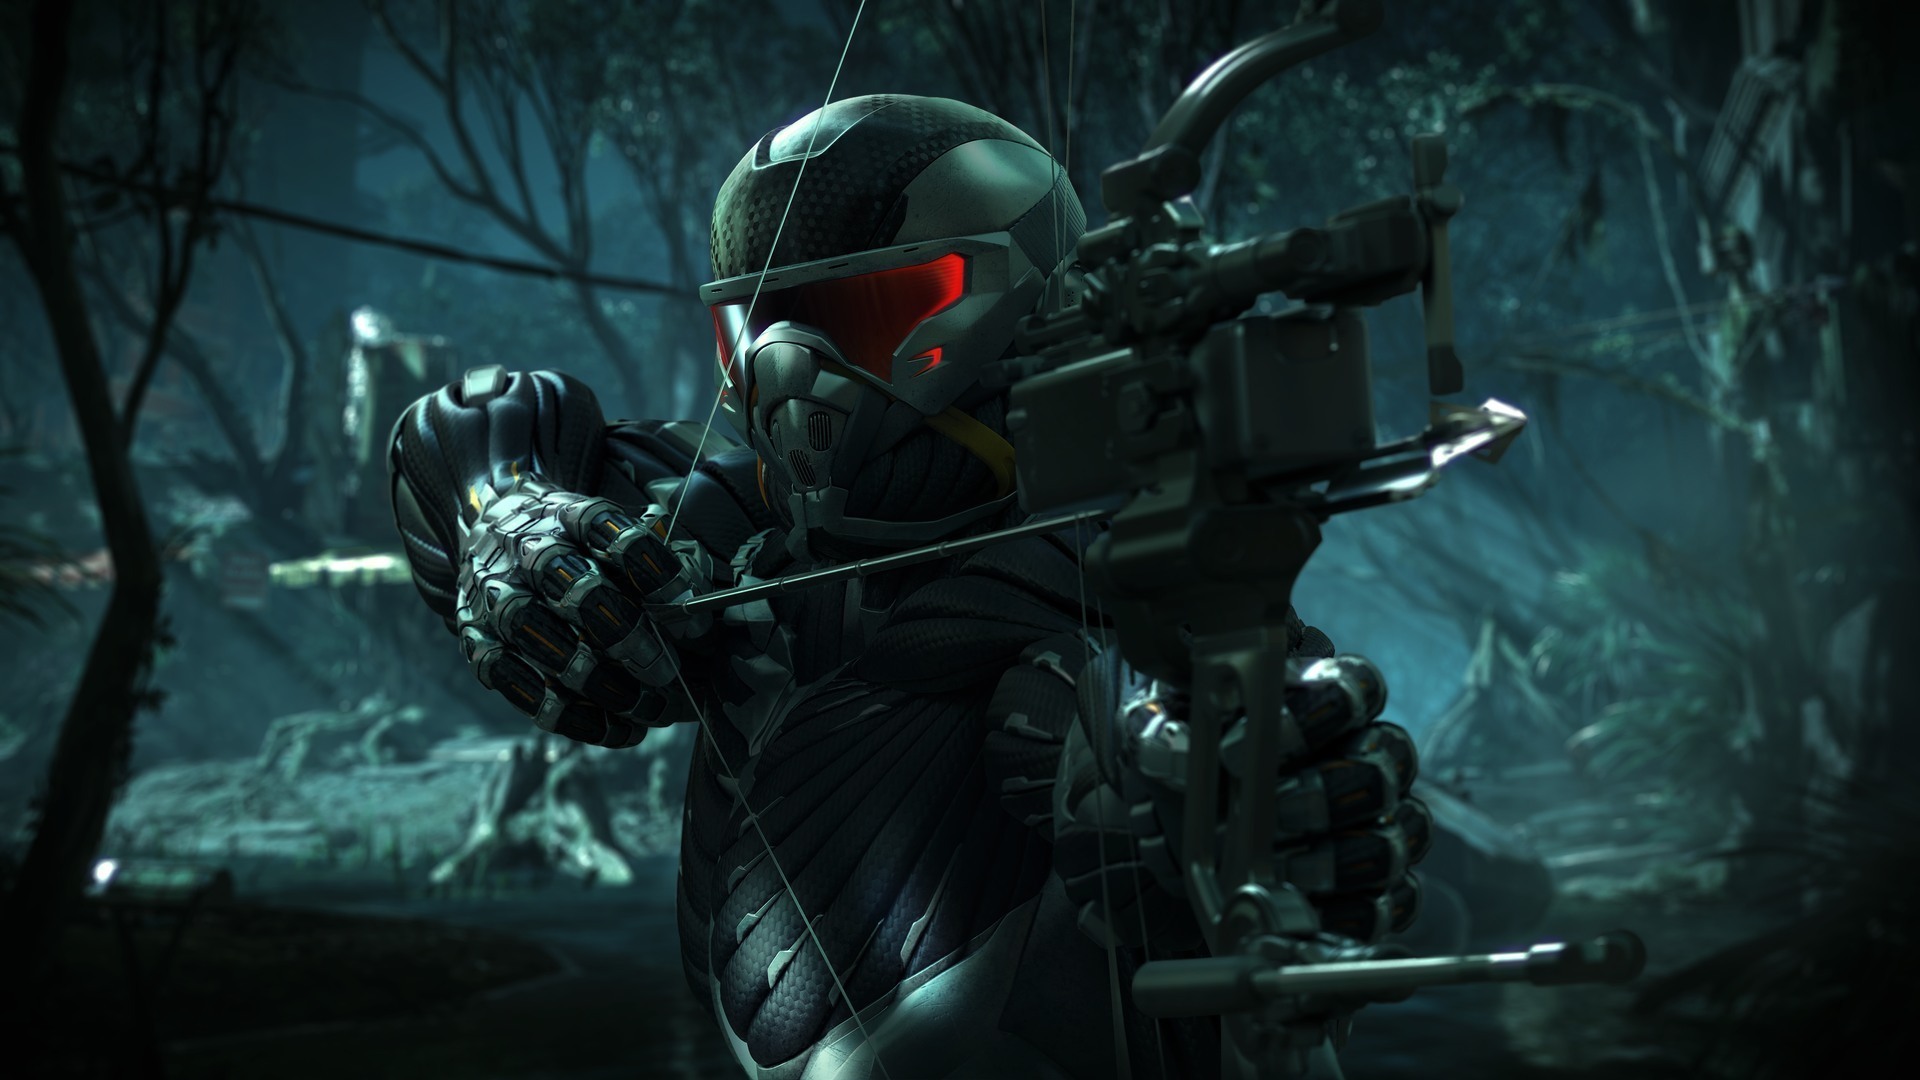 20438 Screensavers and Wallpapers Crysis for phone. Download crysis, games, black pictures for free